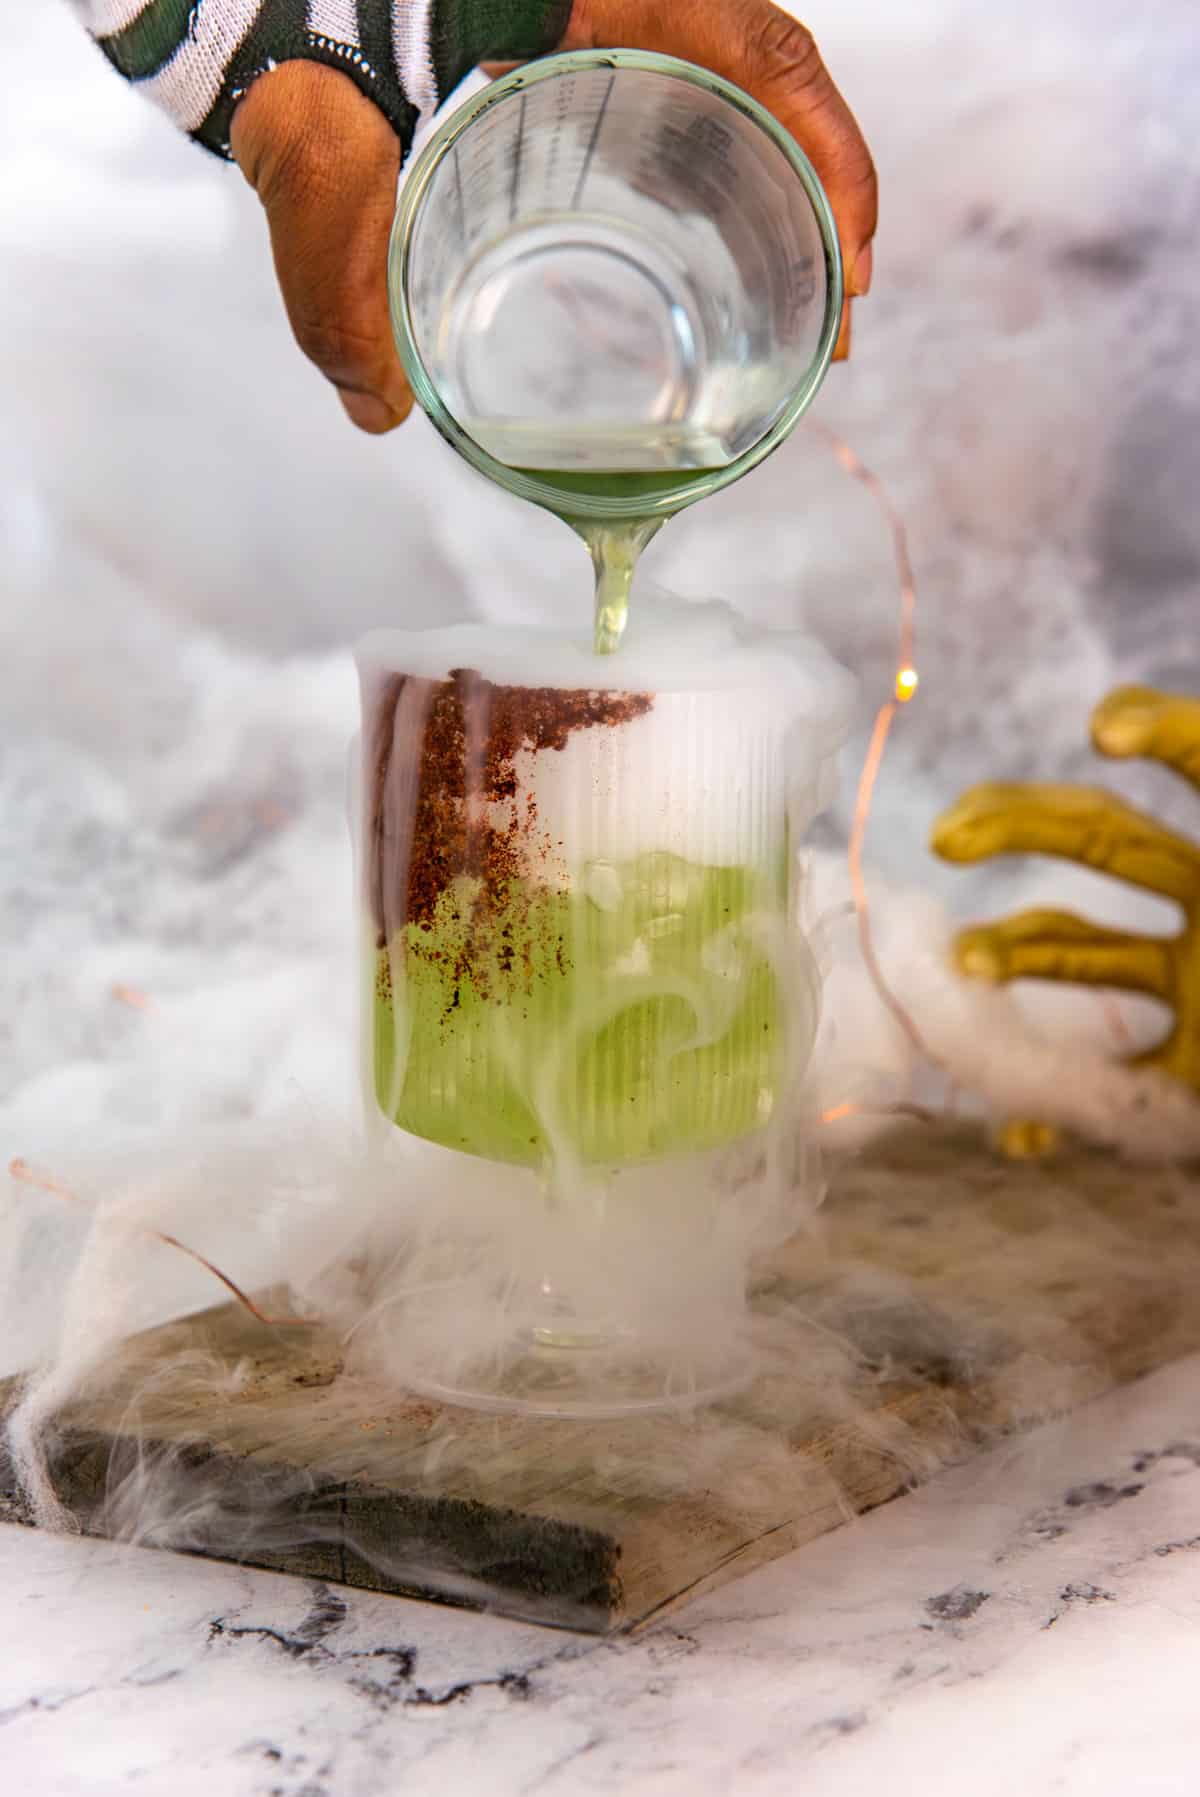 Pouring the green yellowjacket cocktail into a chili salt rimmed goblet glass with smoke spilling out of the glass.